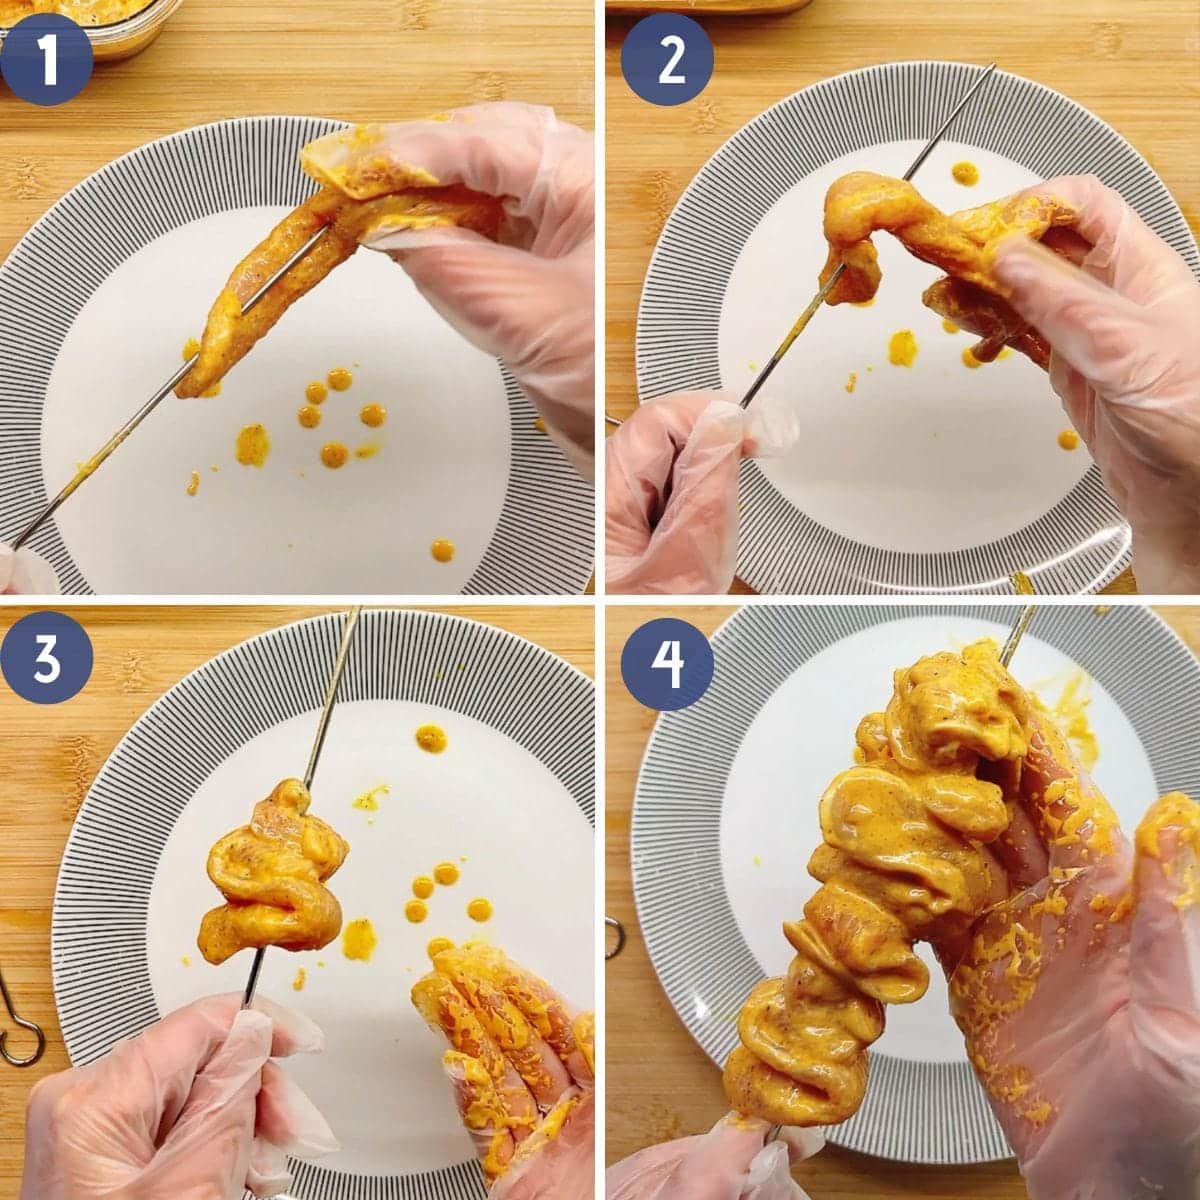 Person demos how to thread chicken onto skewers for grilling.